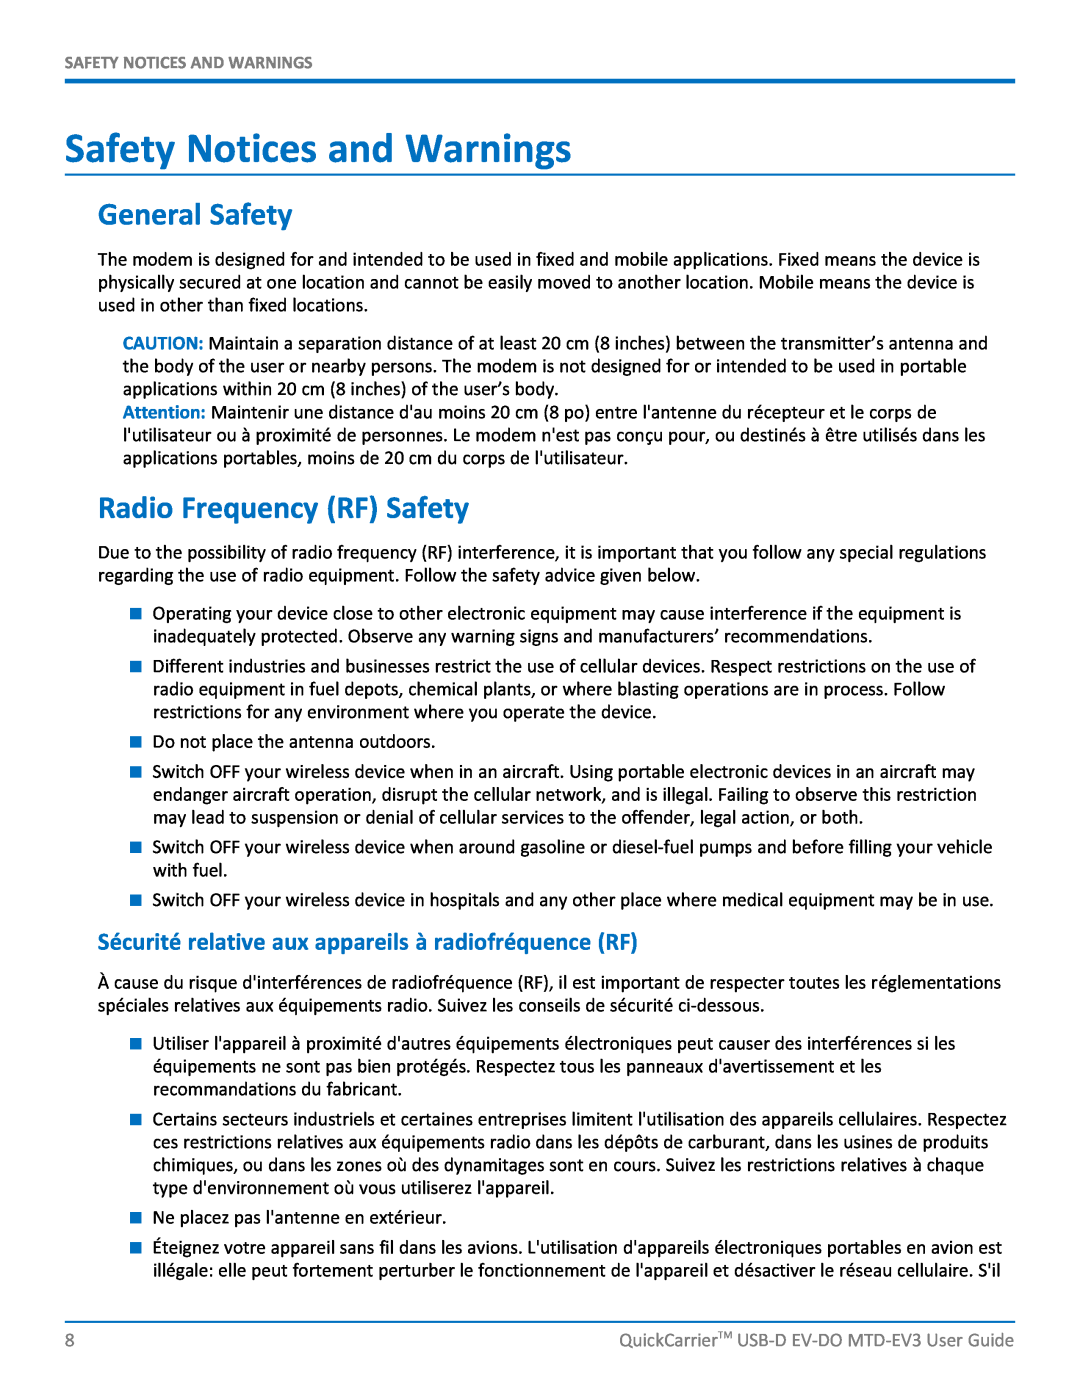 Multi-Tech Systems MTD-EVe manual Safety Notices and Warnings, General Safety, Radio Frequency RF Safety 